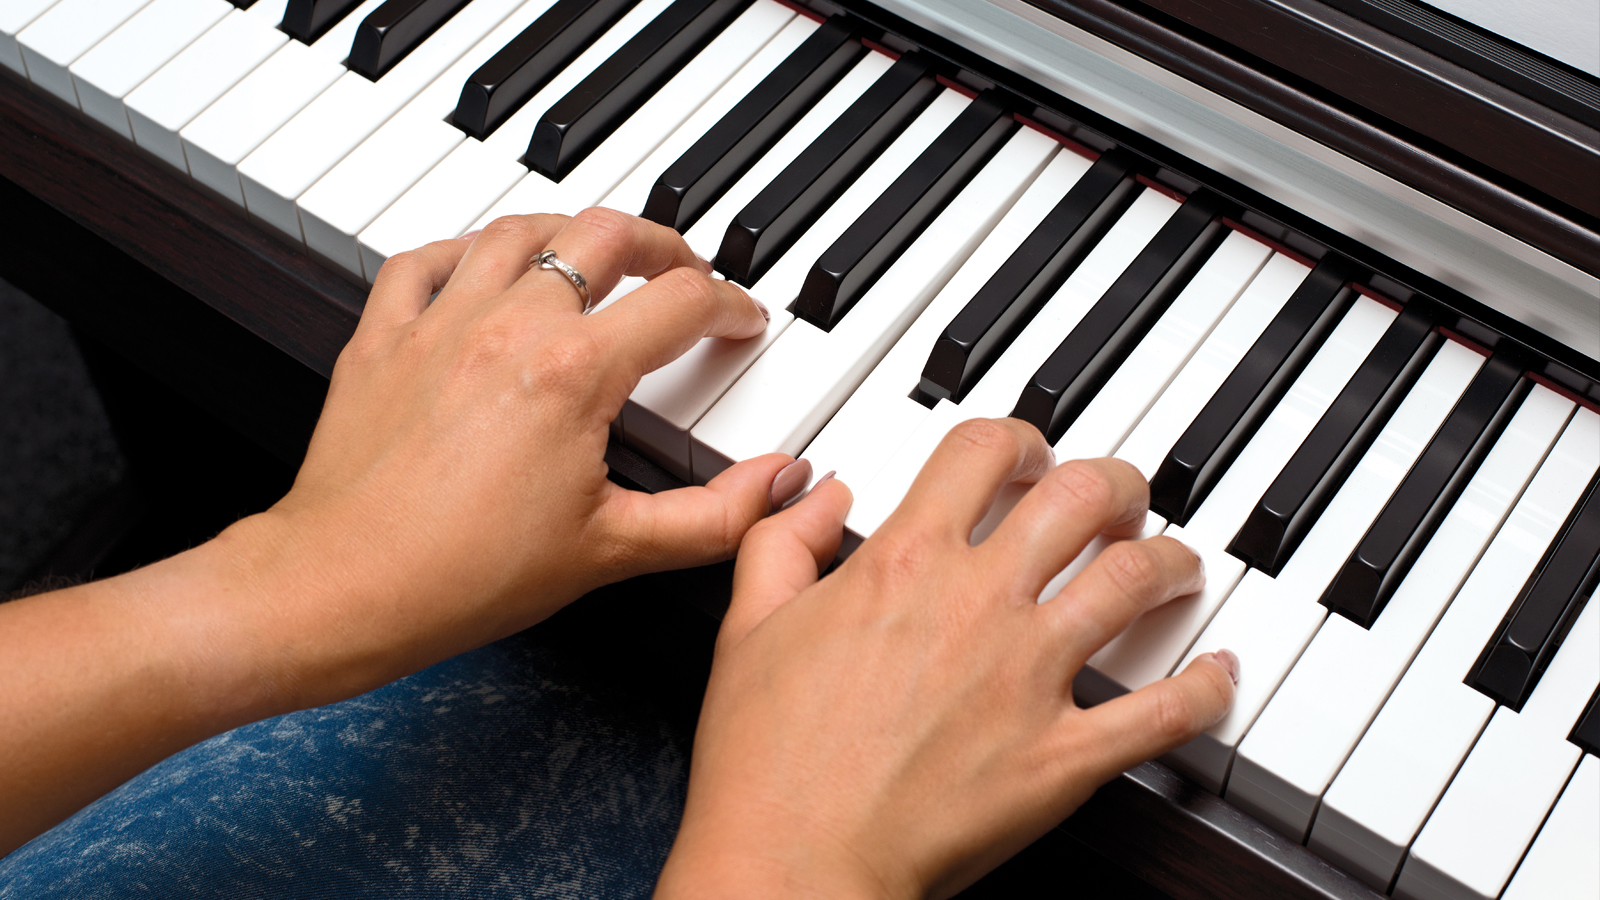 Who Makes the Best Pianos? a comparison between Kawai and Yamaha